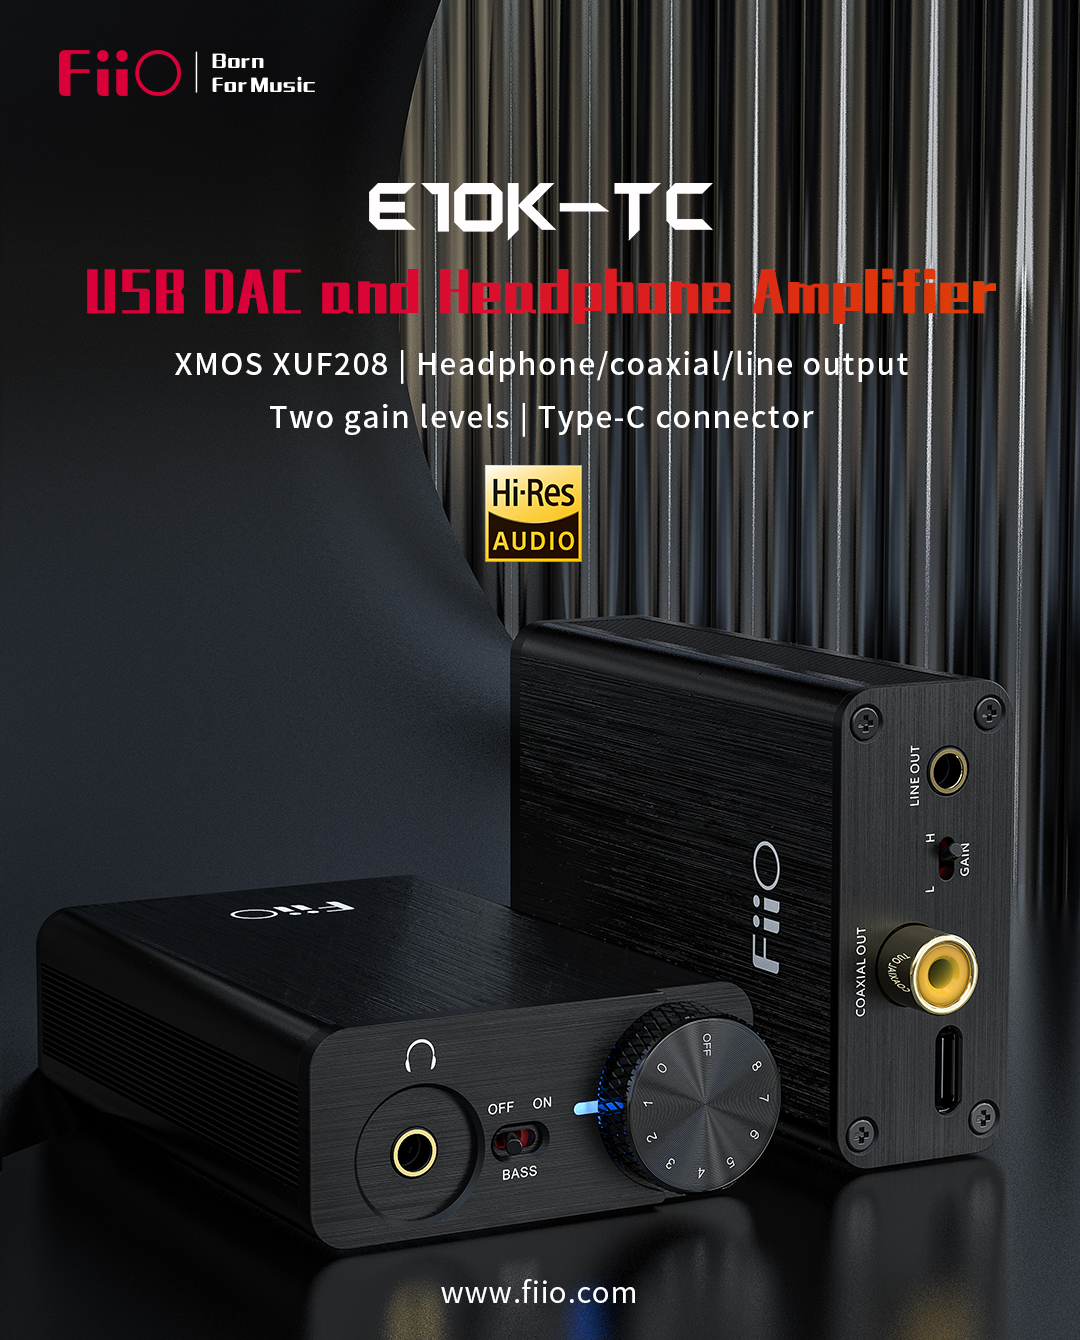 Compact yet Delicate, the Portable DAC/AMP E10K Type-C Is 